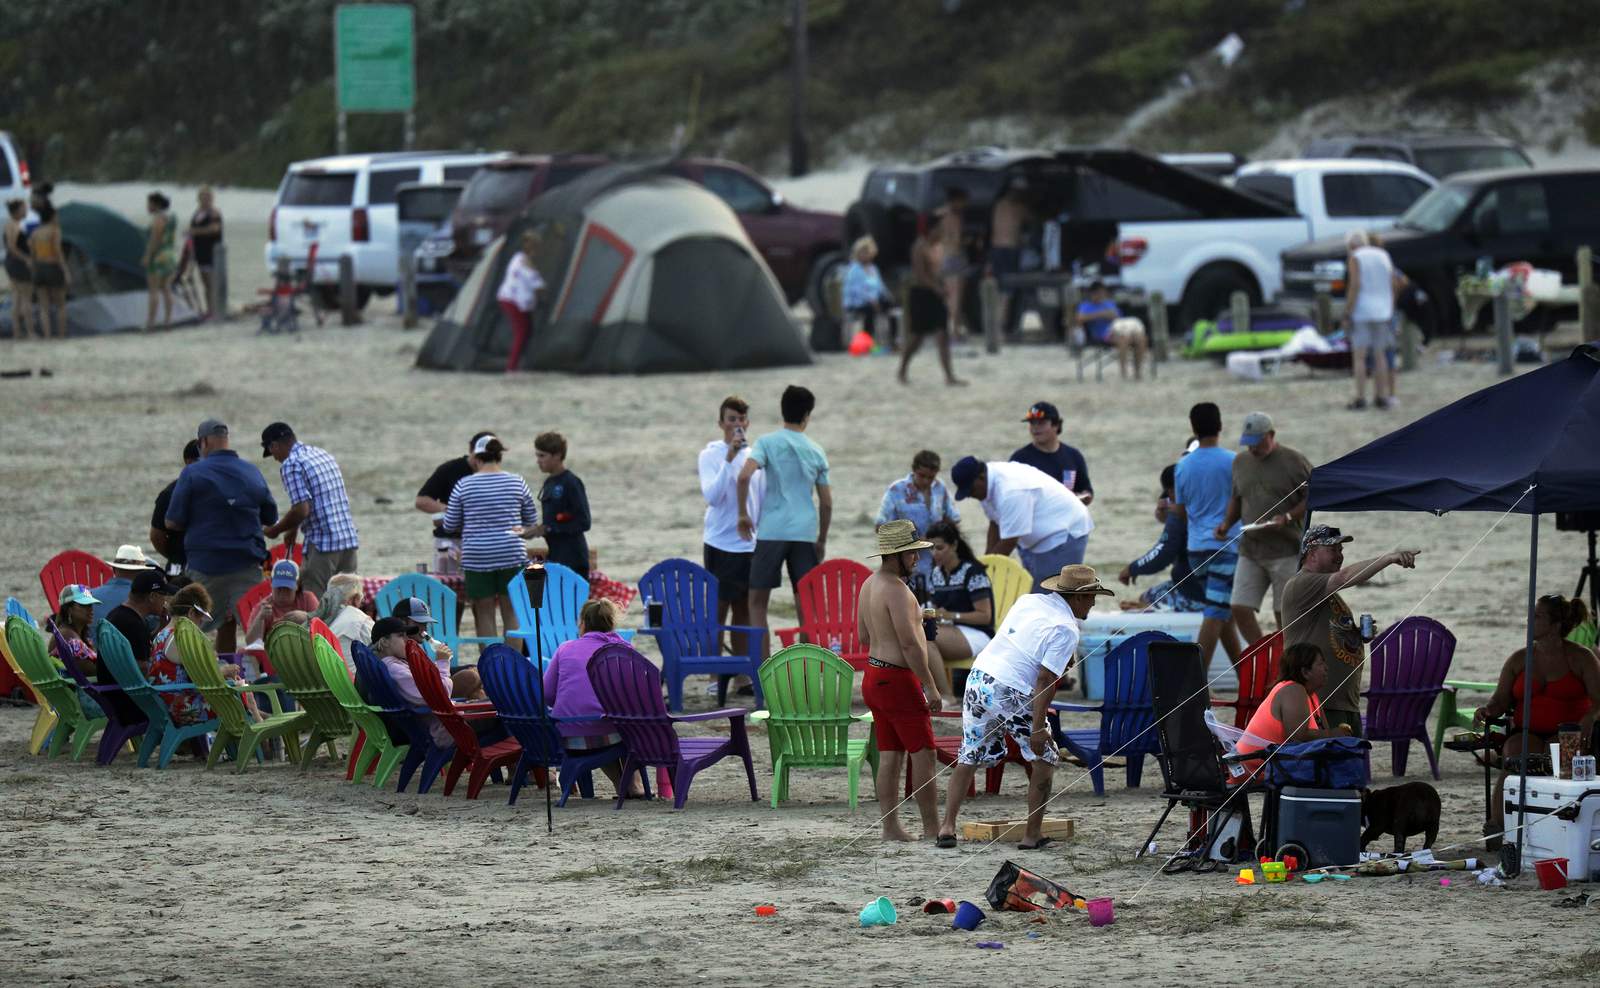 Photos show plenty of people flocked to beaches, but not a lot of social distancing or masks